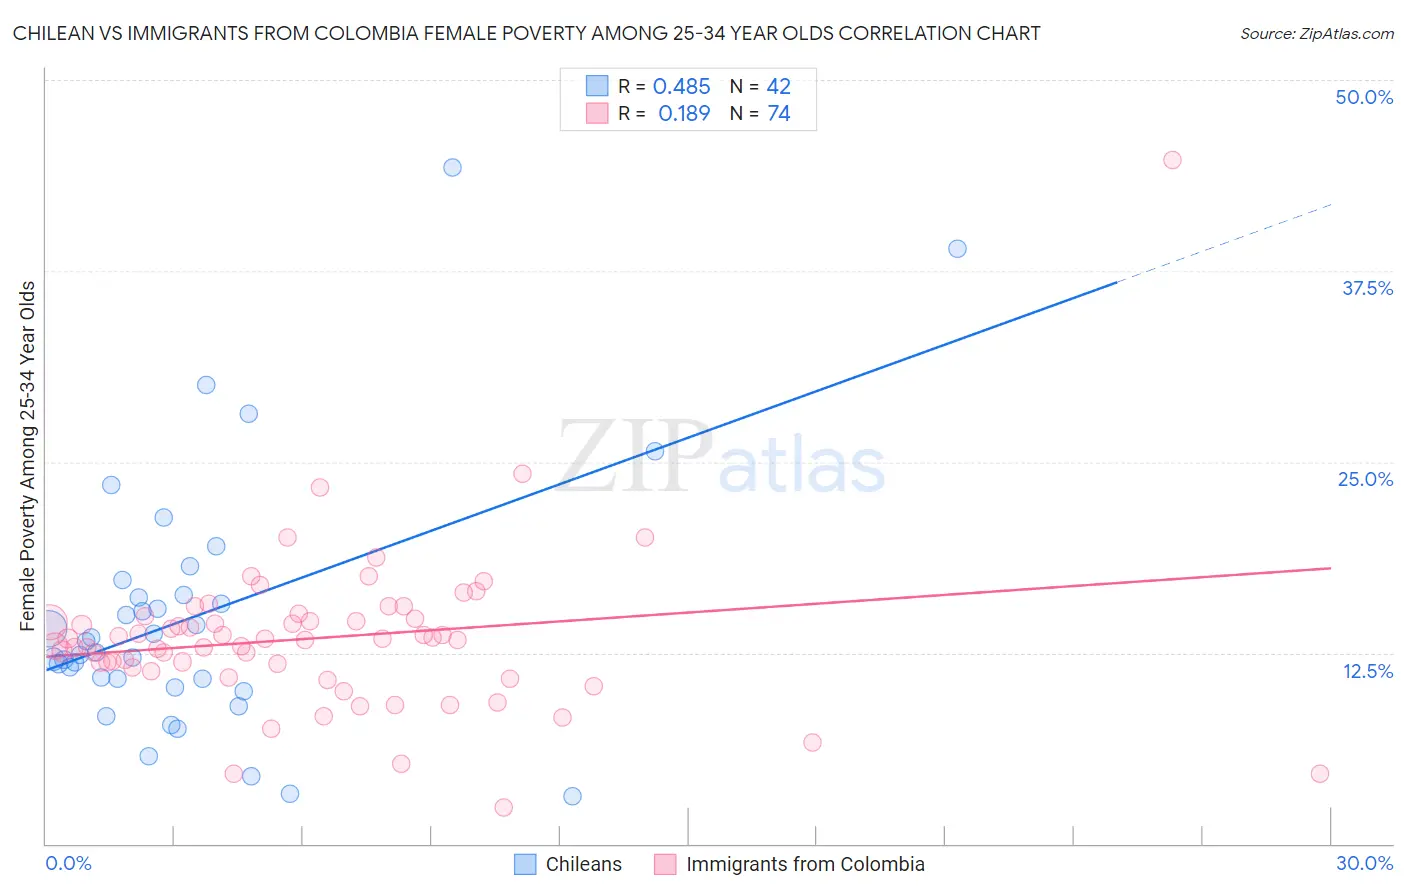 Chilean vs Immigrants from Colombia Female Poverty Among 25-34 Year Olds